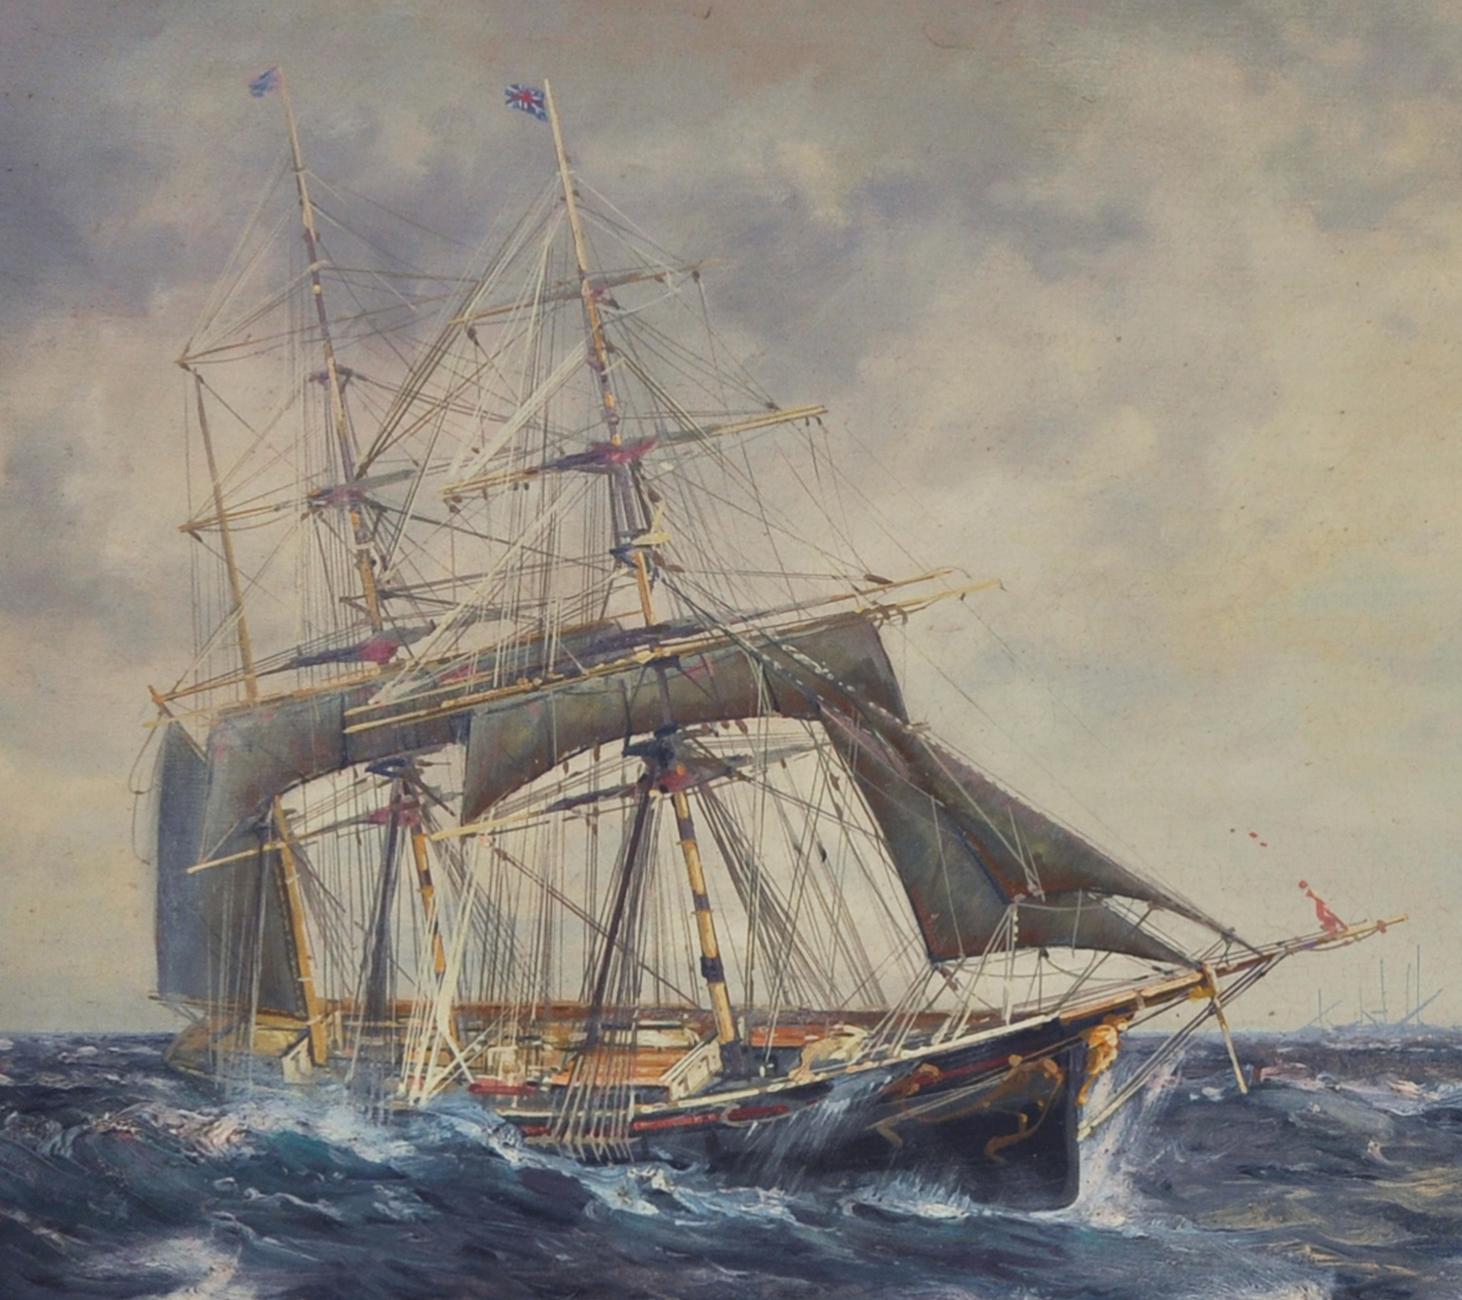 Sailing - John Stevens Italia 2008 - Oil on canvas cm. 60x120.
Gold leaf gilded and ebony laquered wooden frame cm. 82 x 142
John Stevens, using subtle washes of oil paint, slowly builds his highly detailed paintings of naval battle scenes and